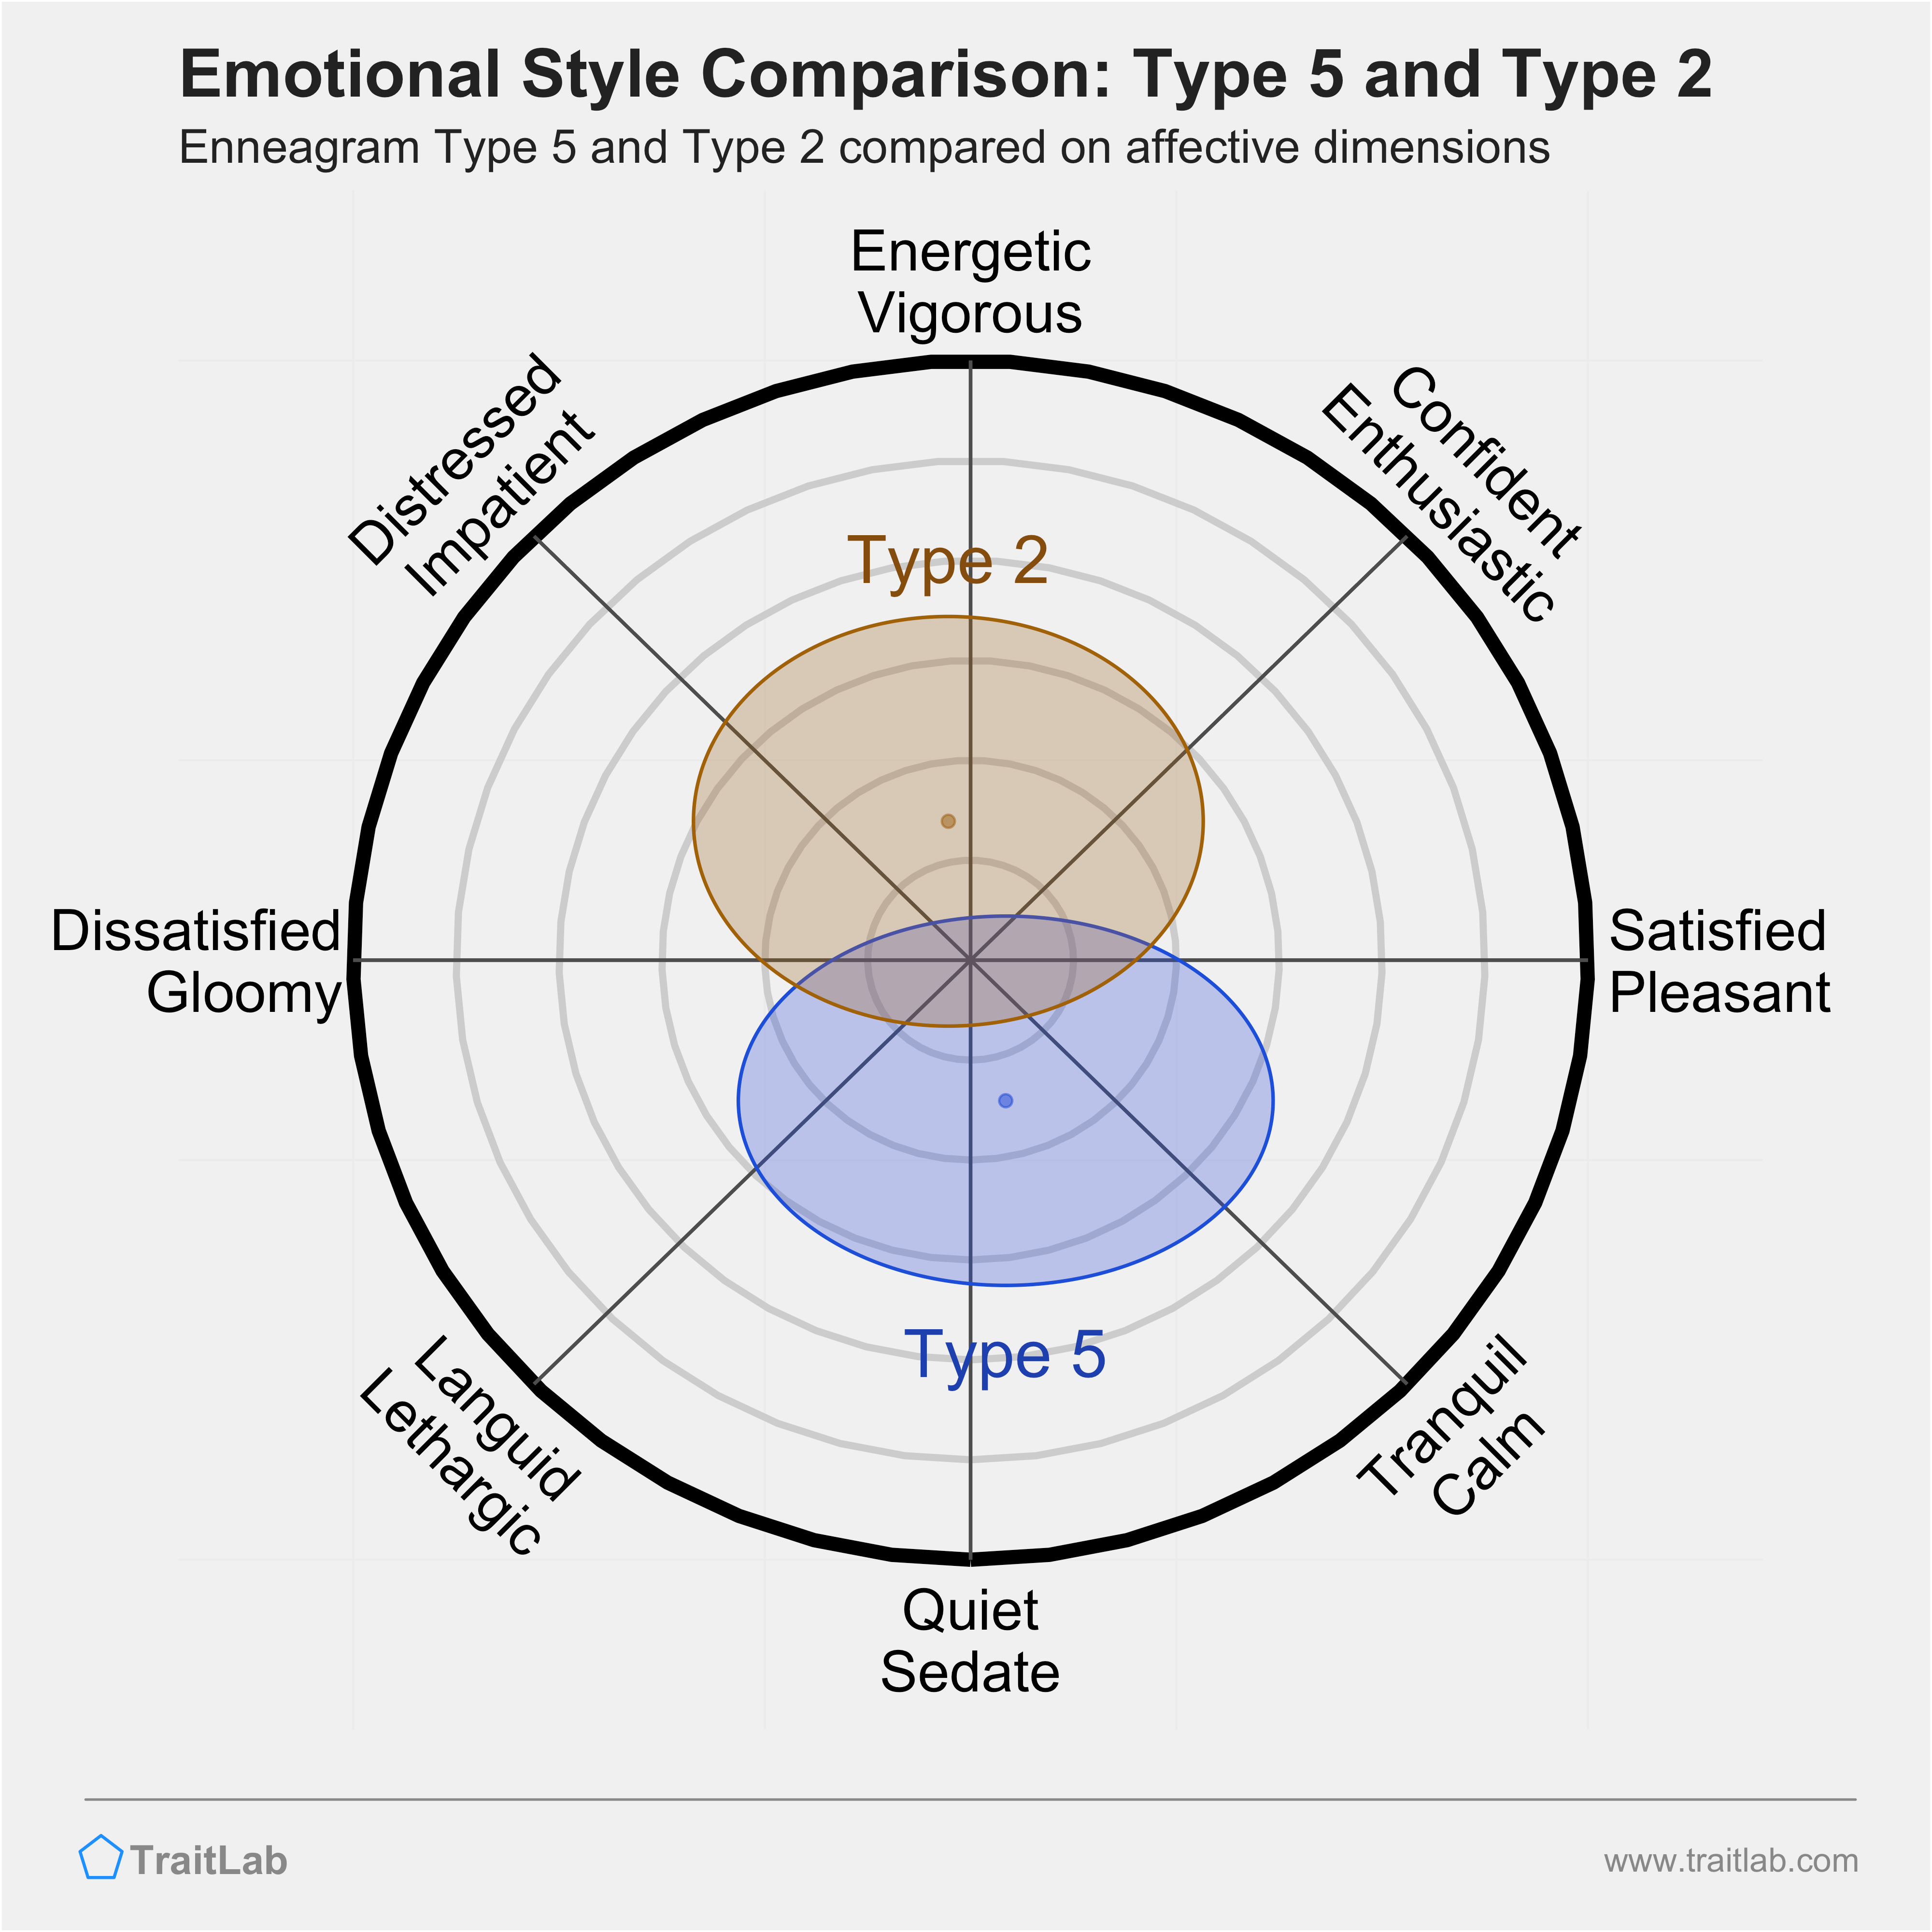 Type 5 and Type 2 comparison across emotional (affective) dimensions